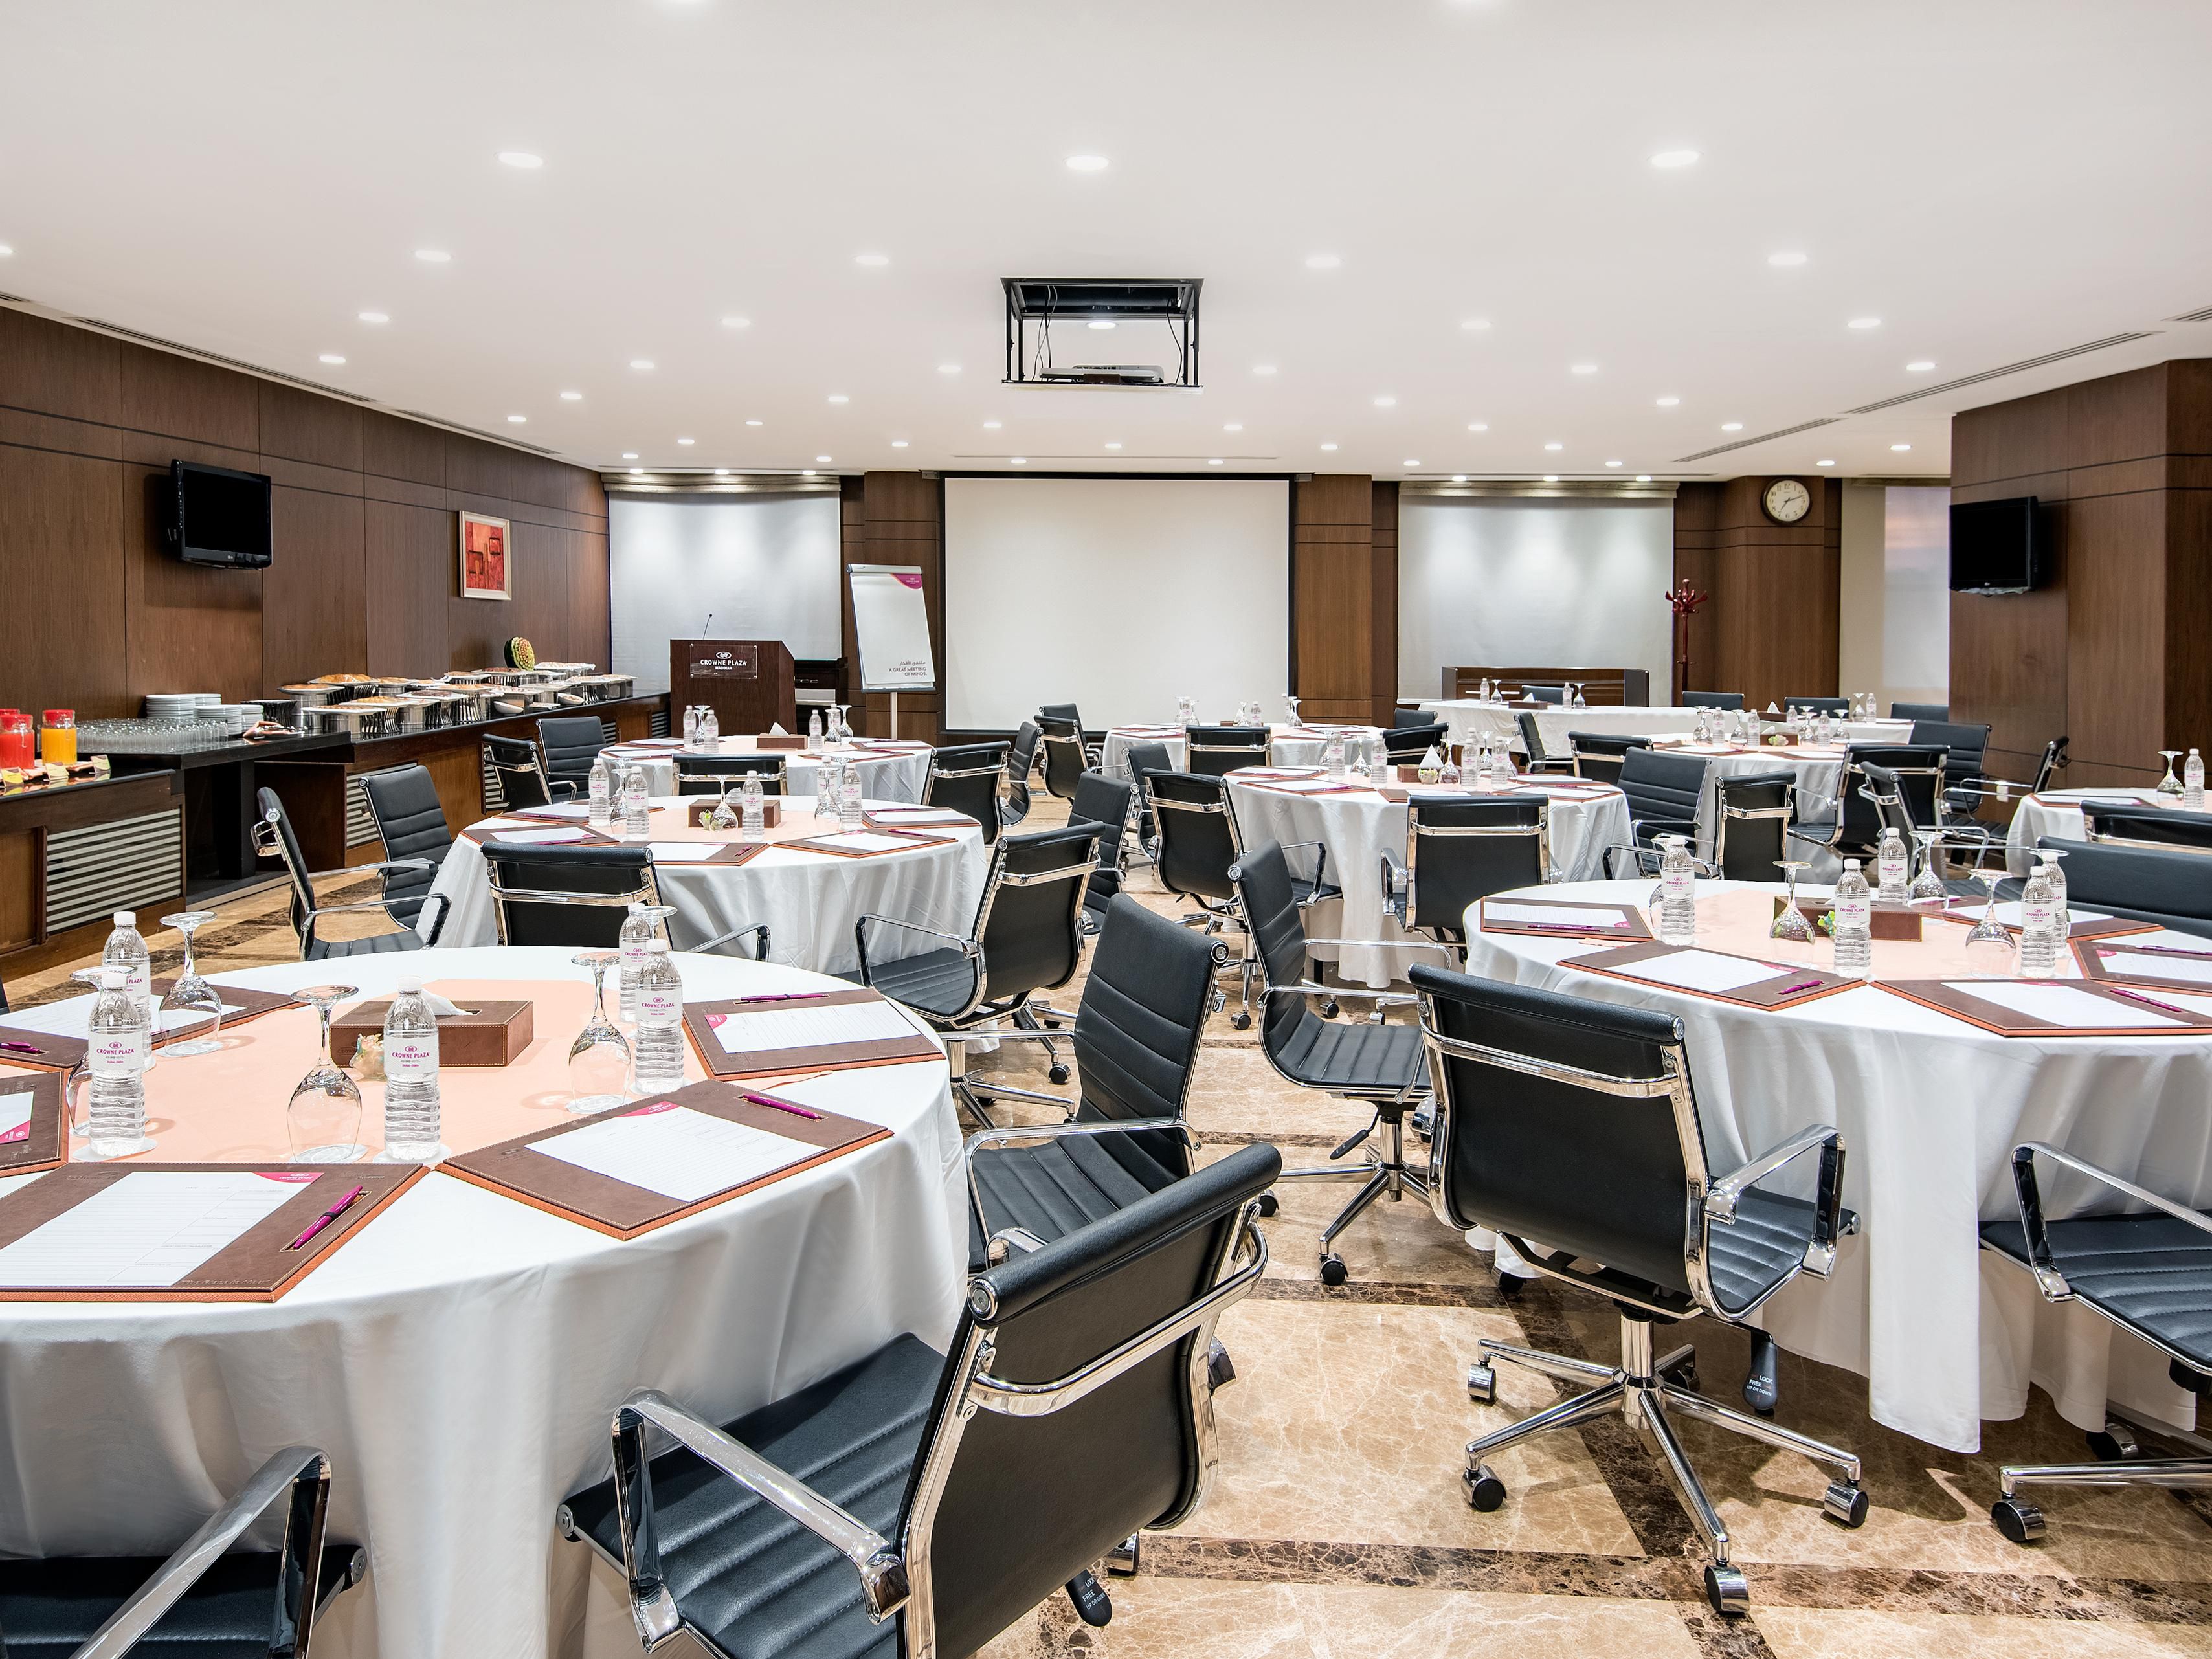 The unique hotel meeting space that utilizes new technology, flexible seating arrangements, and inspiring tools & activities; all intended to stimulate creativity and provide an upbeat, non-traditional meeting experience.